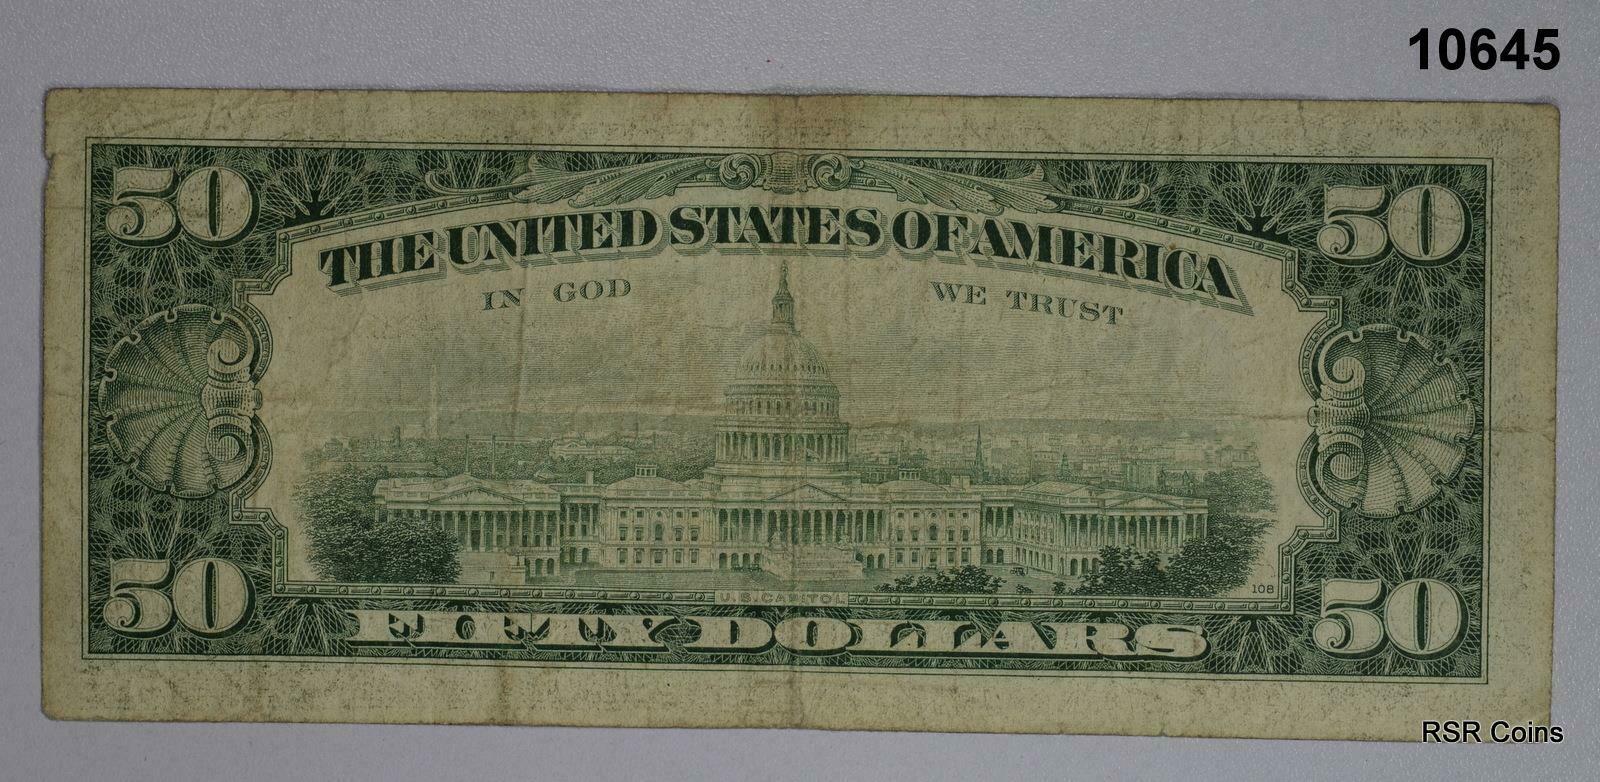 1977 $50 FEDERAL RESERVE NOTE OFF CENTER PRINTED #10645